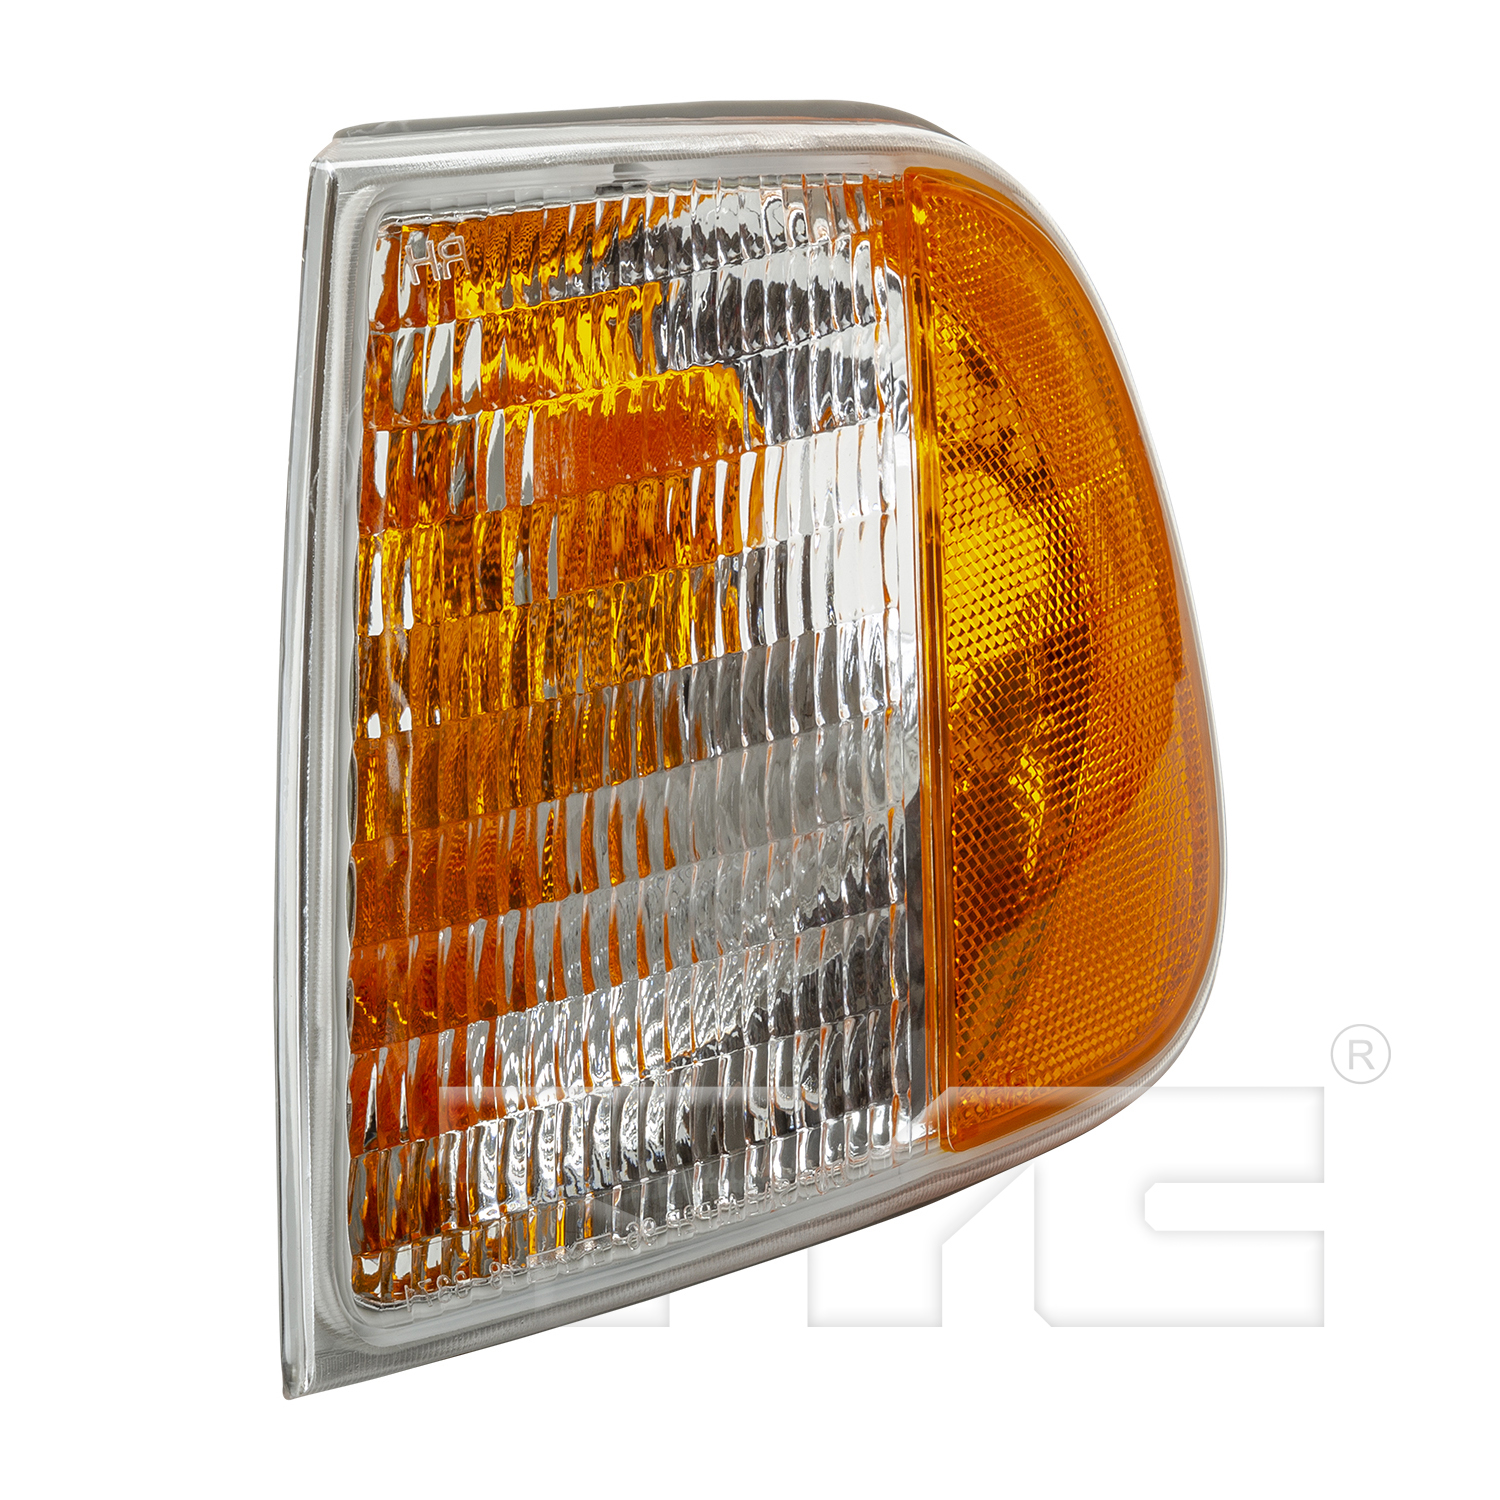 Aftermarket LAMPS for FORD - EXPEDITION, EXPEDITION,97-02,LT Front marker lamp assy